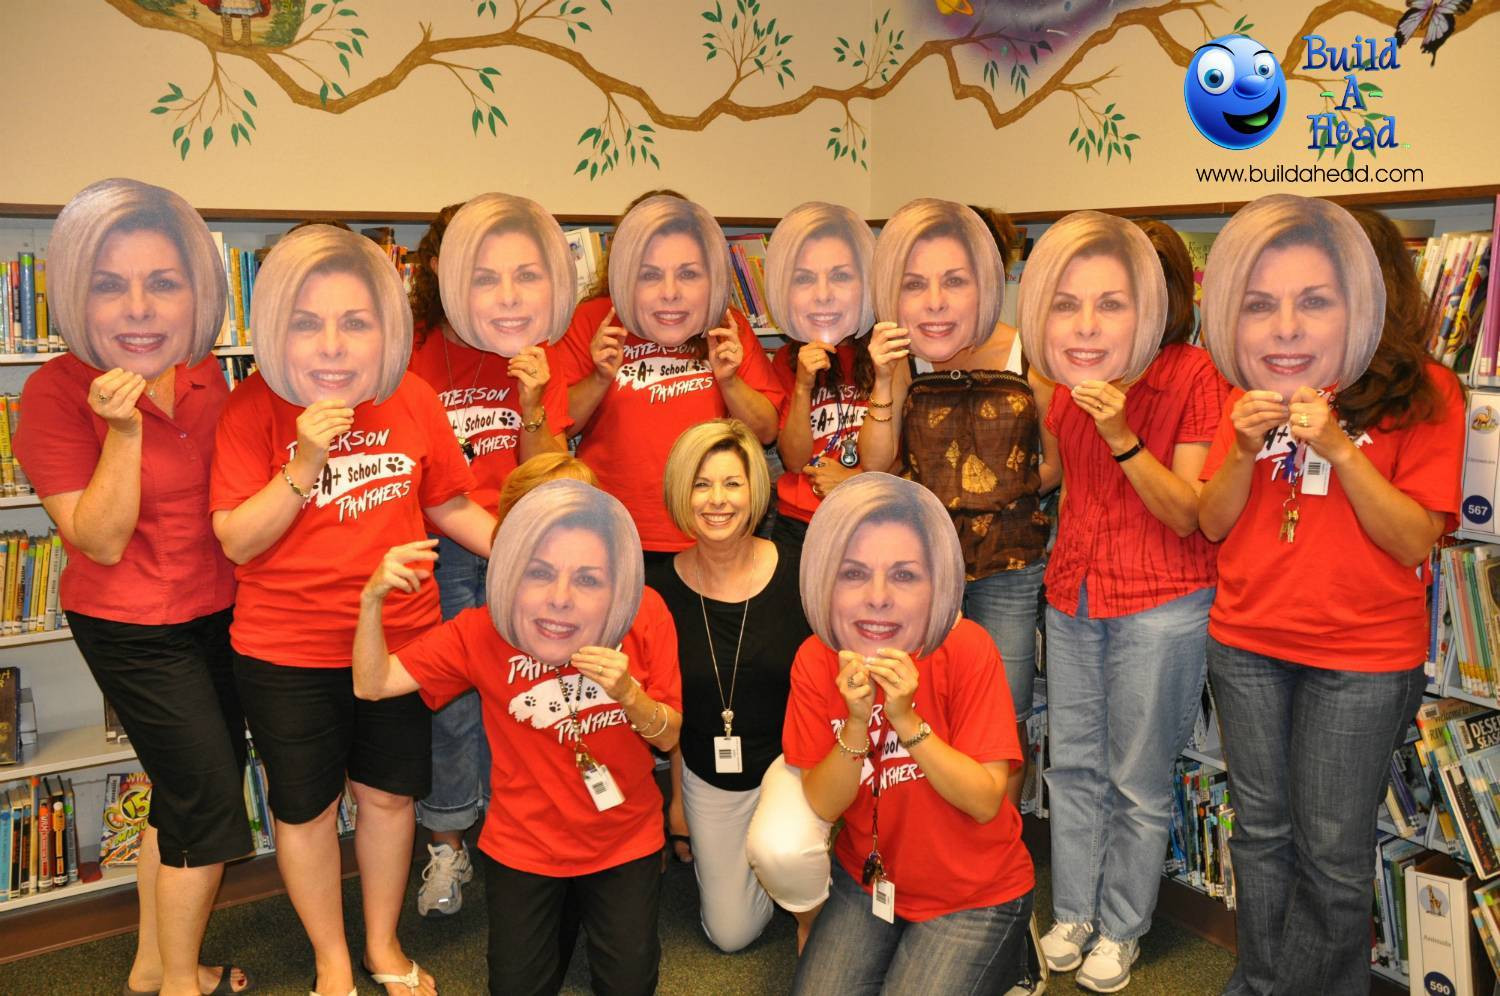 Family Retirement Party Ideas
 Big heads are perfect decorations and party favors for